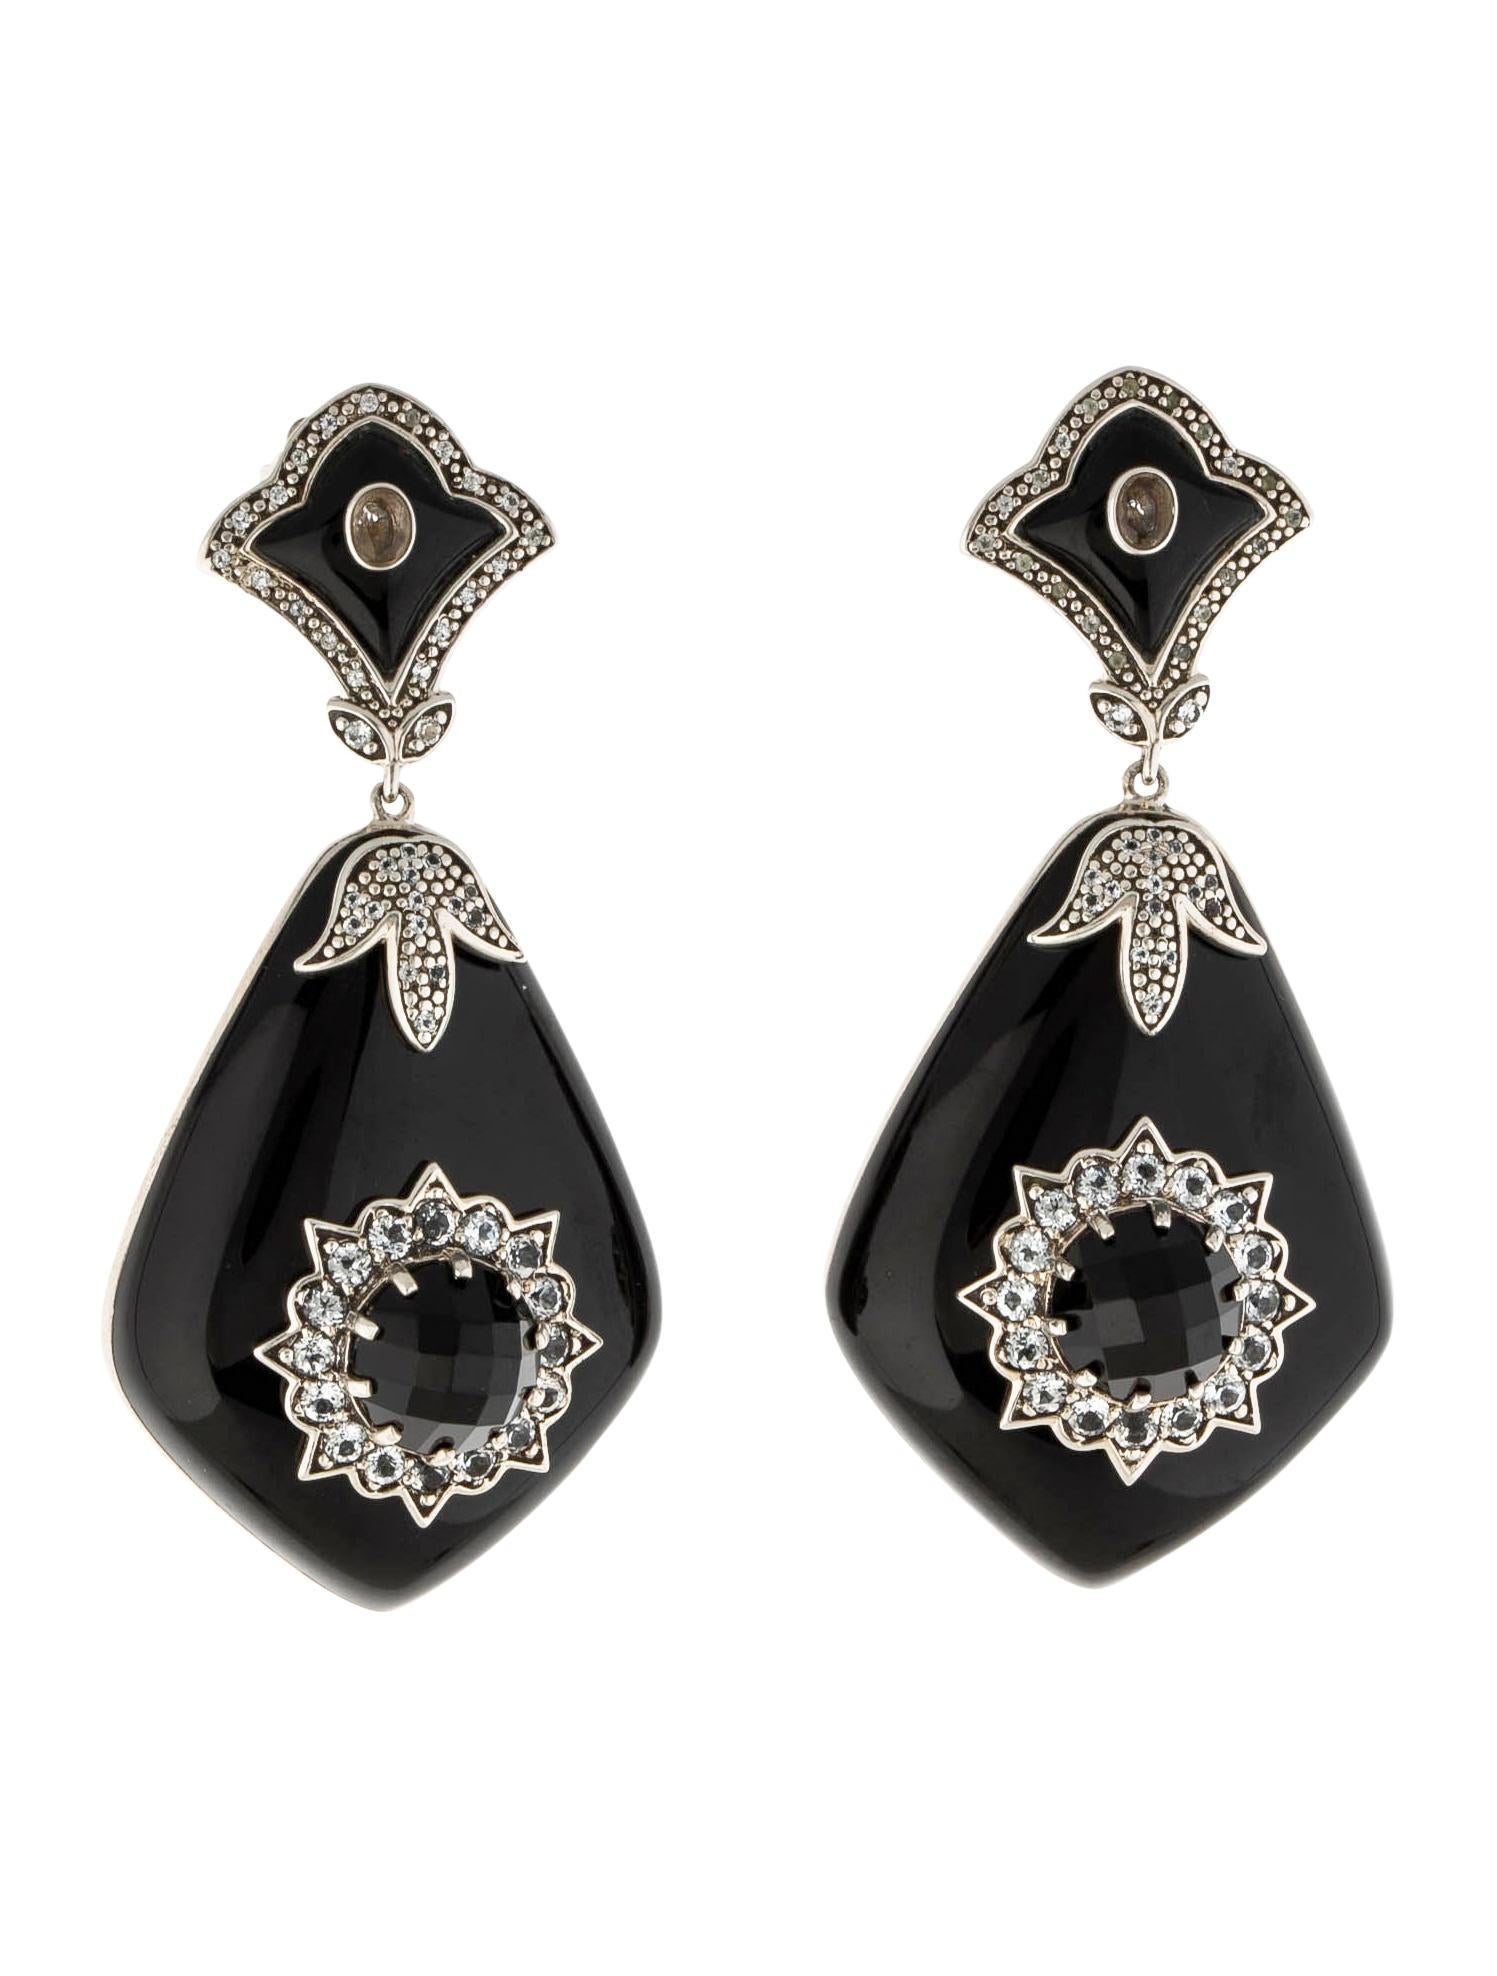 Miriam Salat 'MRM' Noir Evening Black Resin and White Topaz Drop Earrings In New Condition For Sale In New York, NY